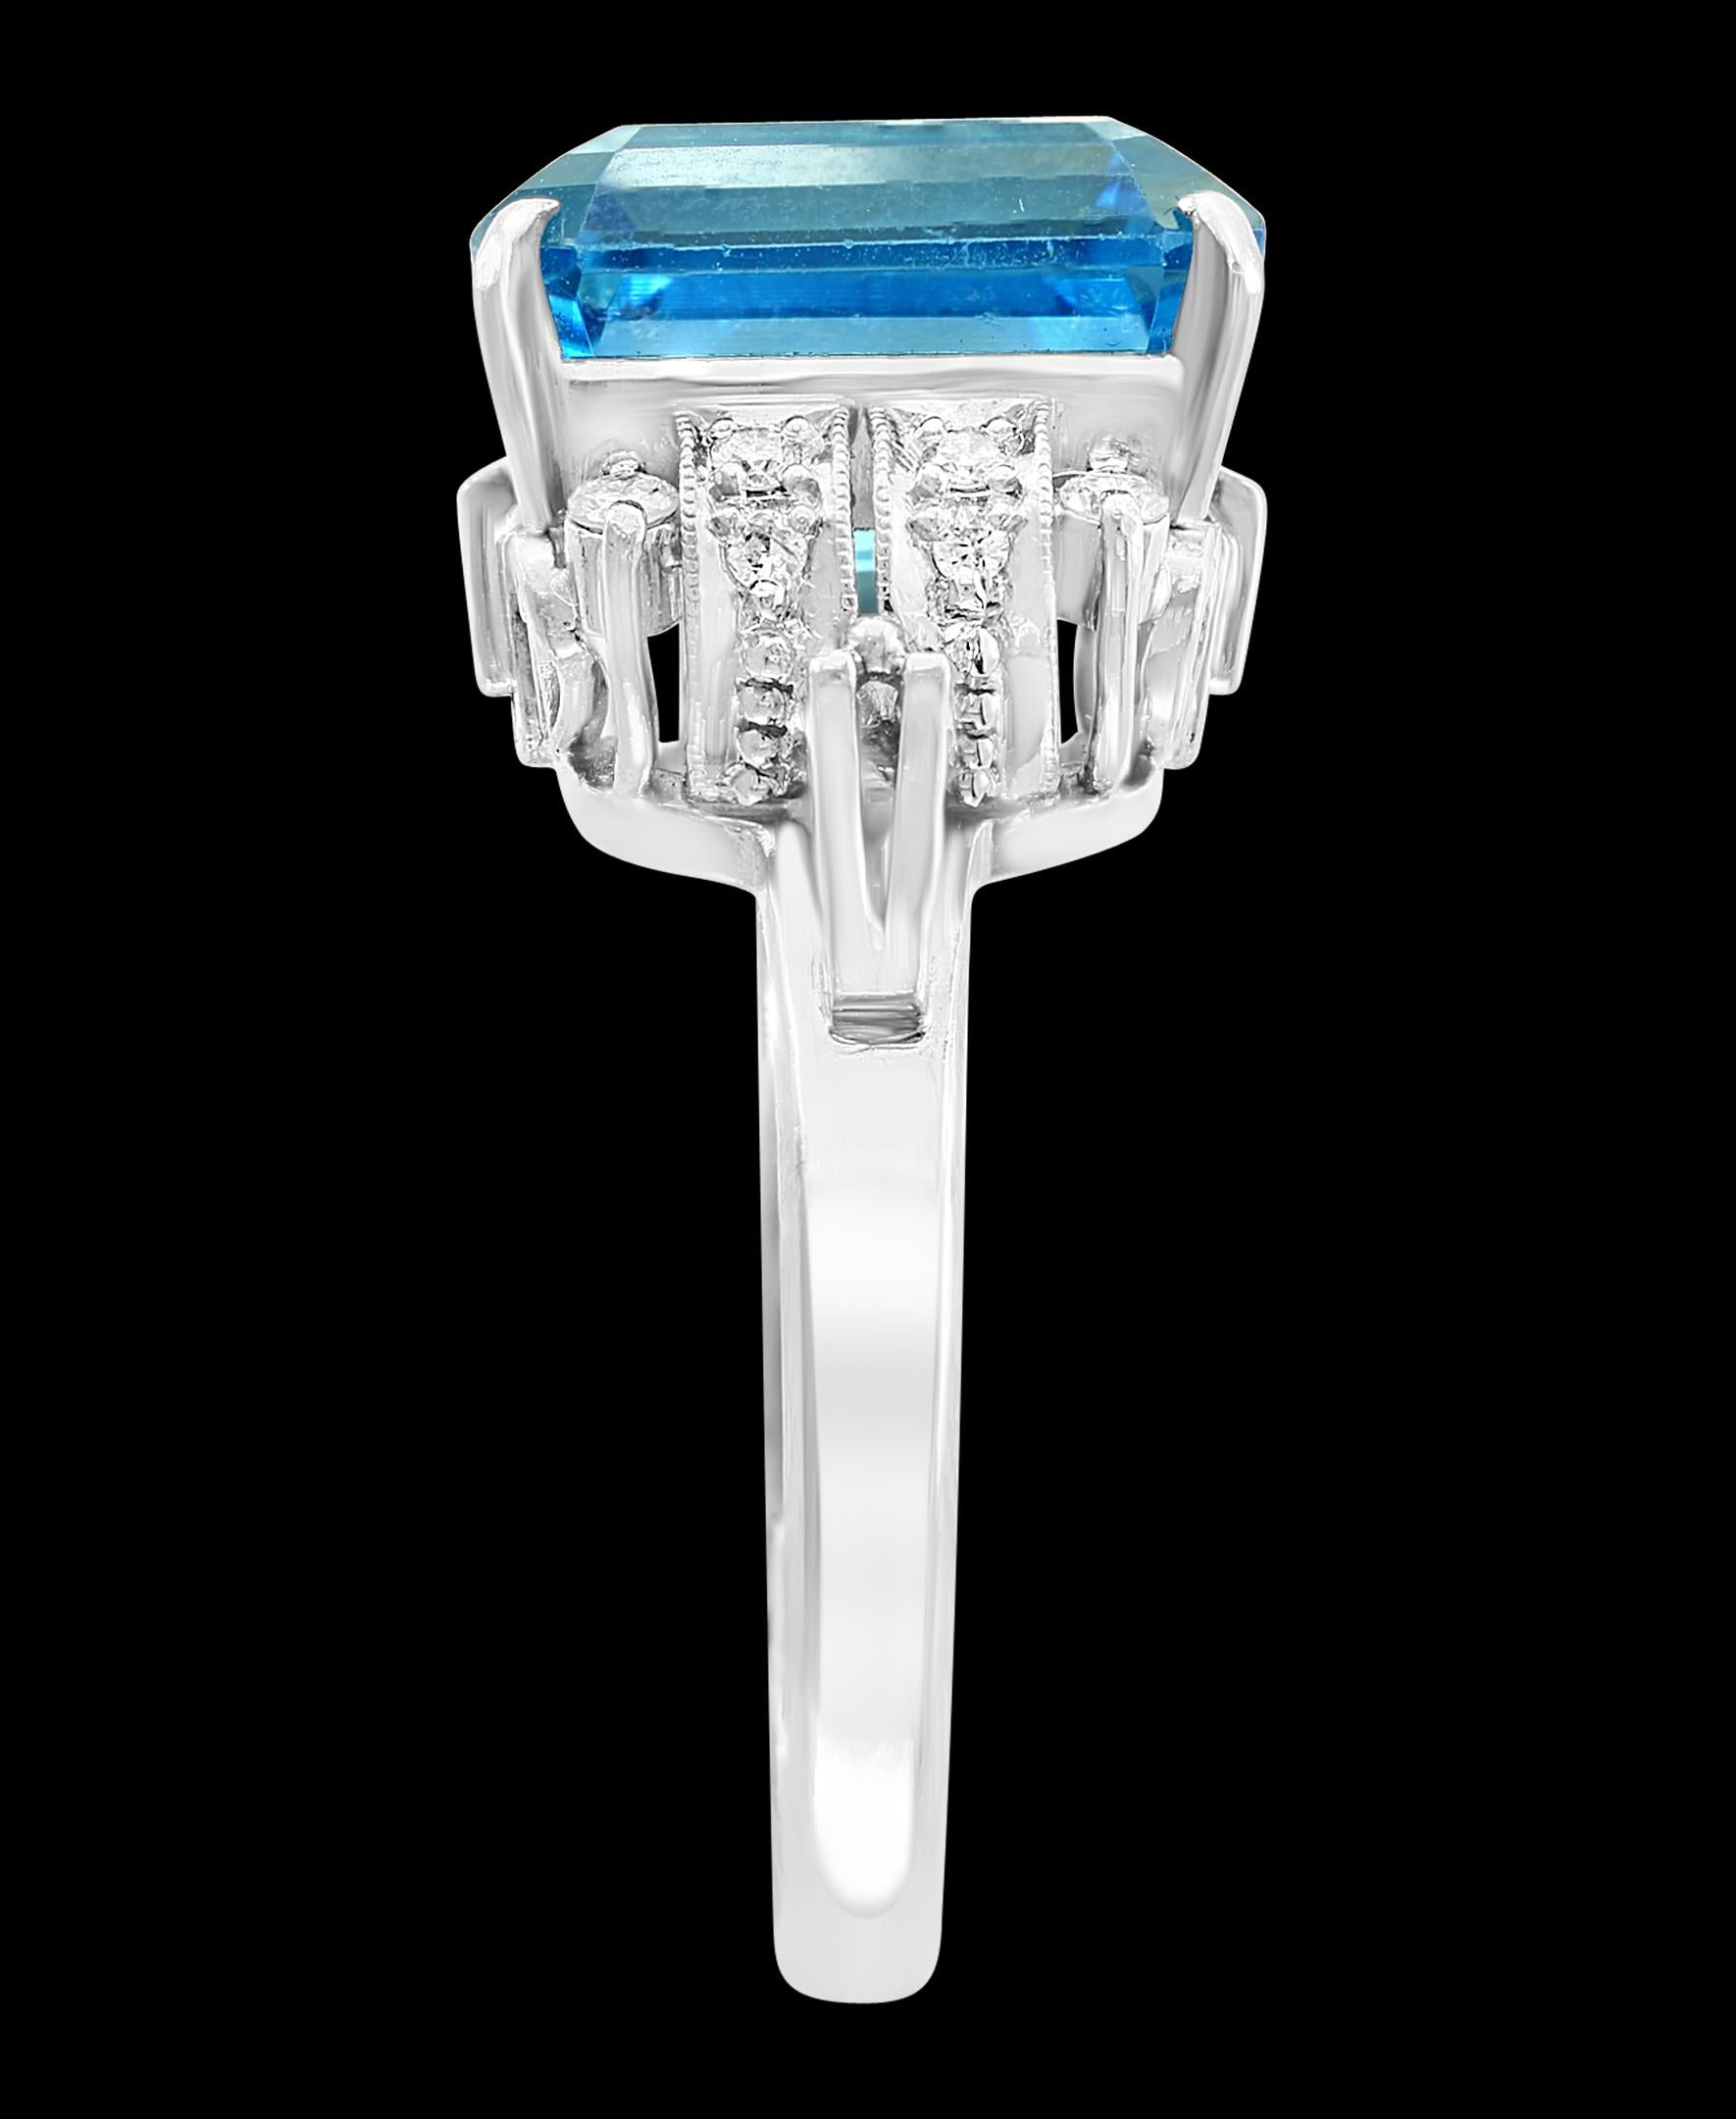 A classic, High Quality Blue Topaz
5.8  Carat of very clean no inclusion   natural Blue Topaz  and Diamond Ring
Platinum 10 gm
Diamonds : 0.10 Carats
It’s very hard to capture the true color and luster of the stone, I have tried to add pictures